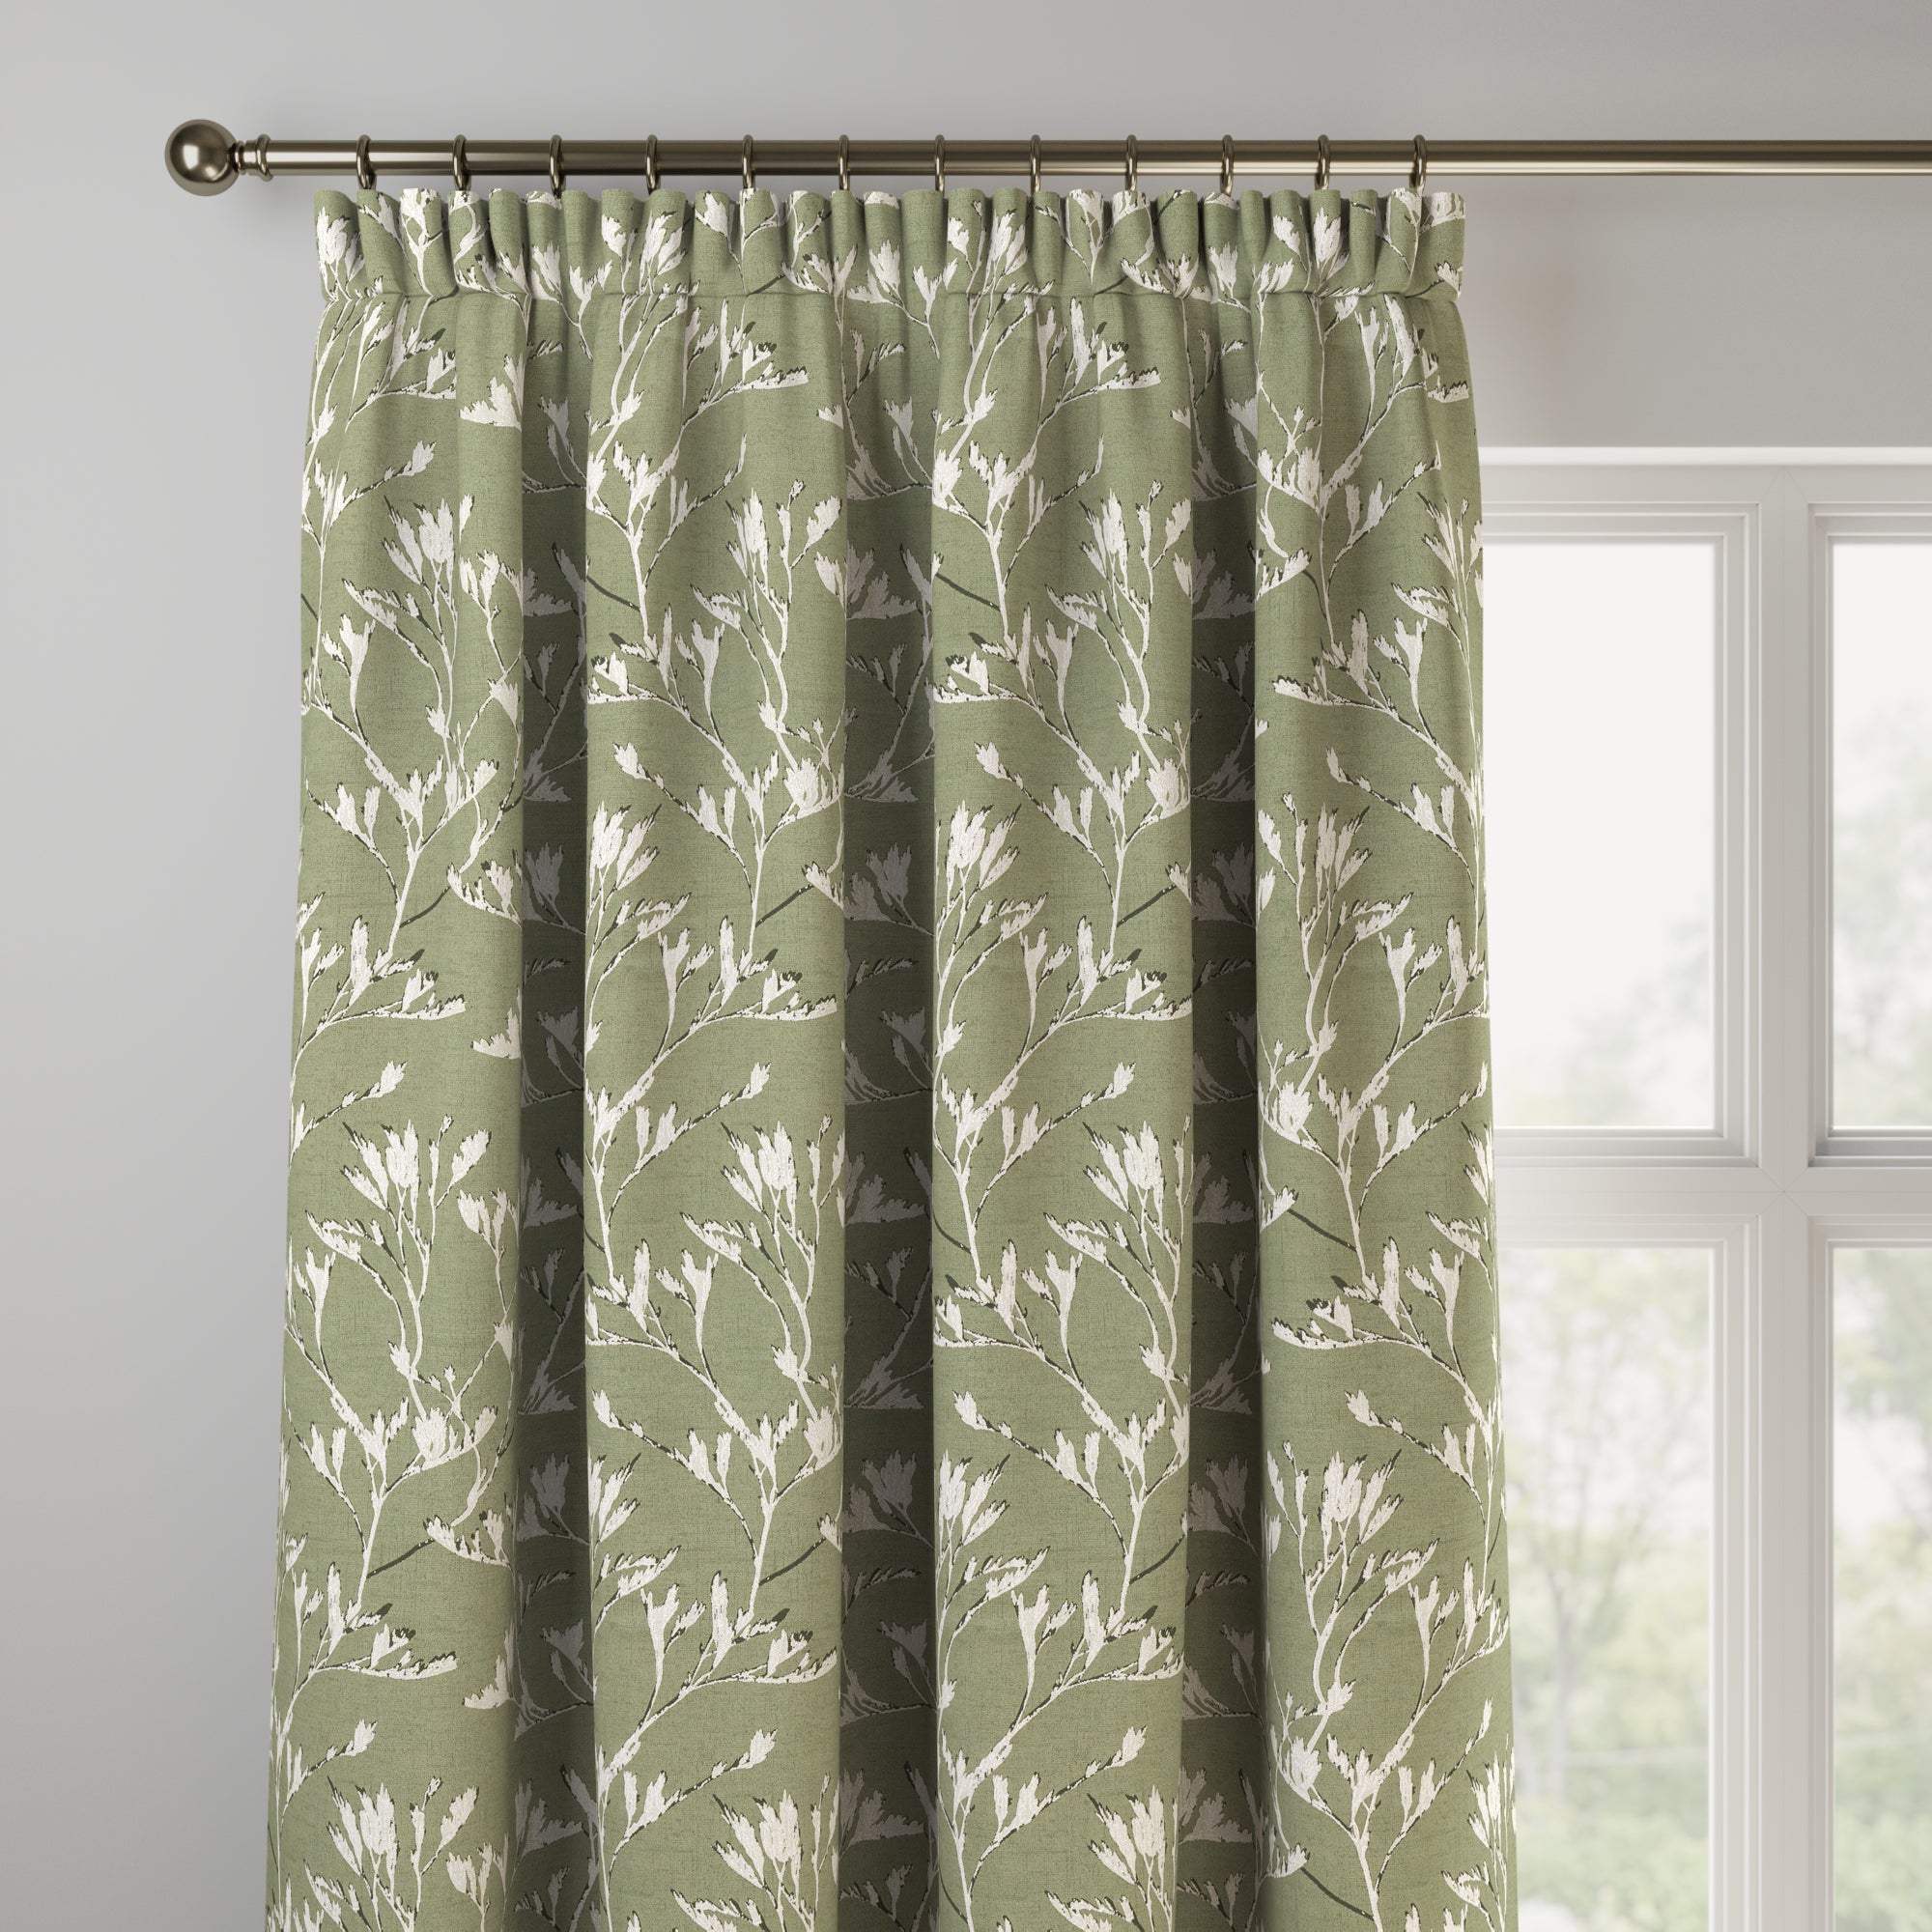 Rhone Made to Measure Curtains | Dunelm